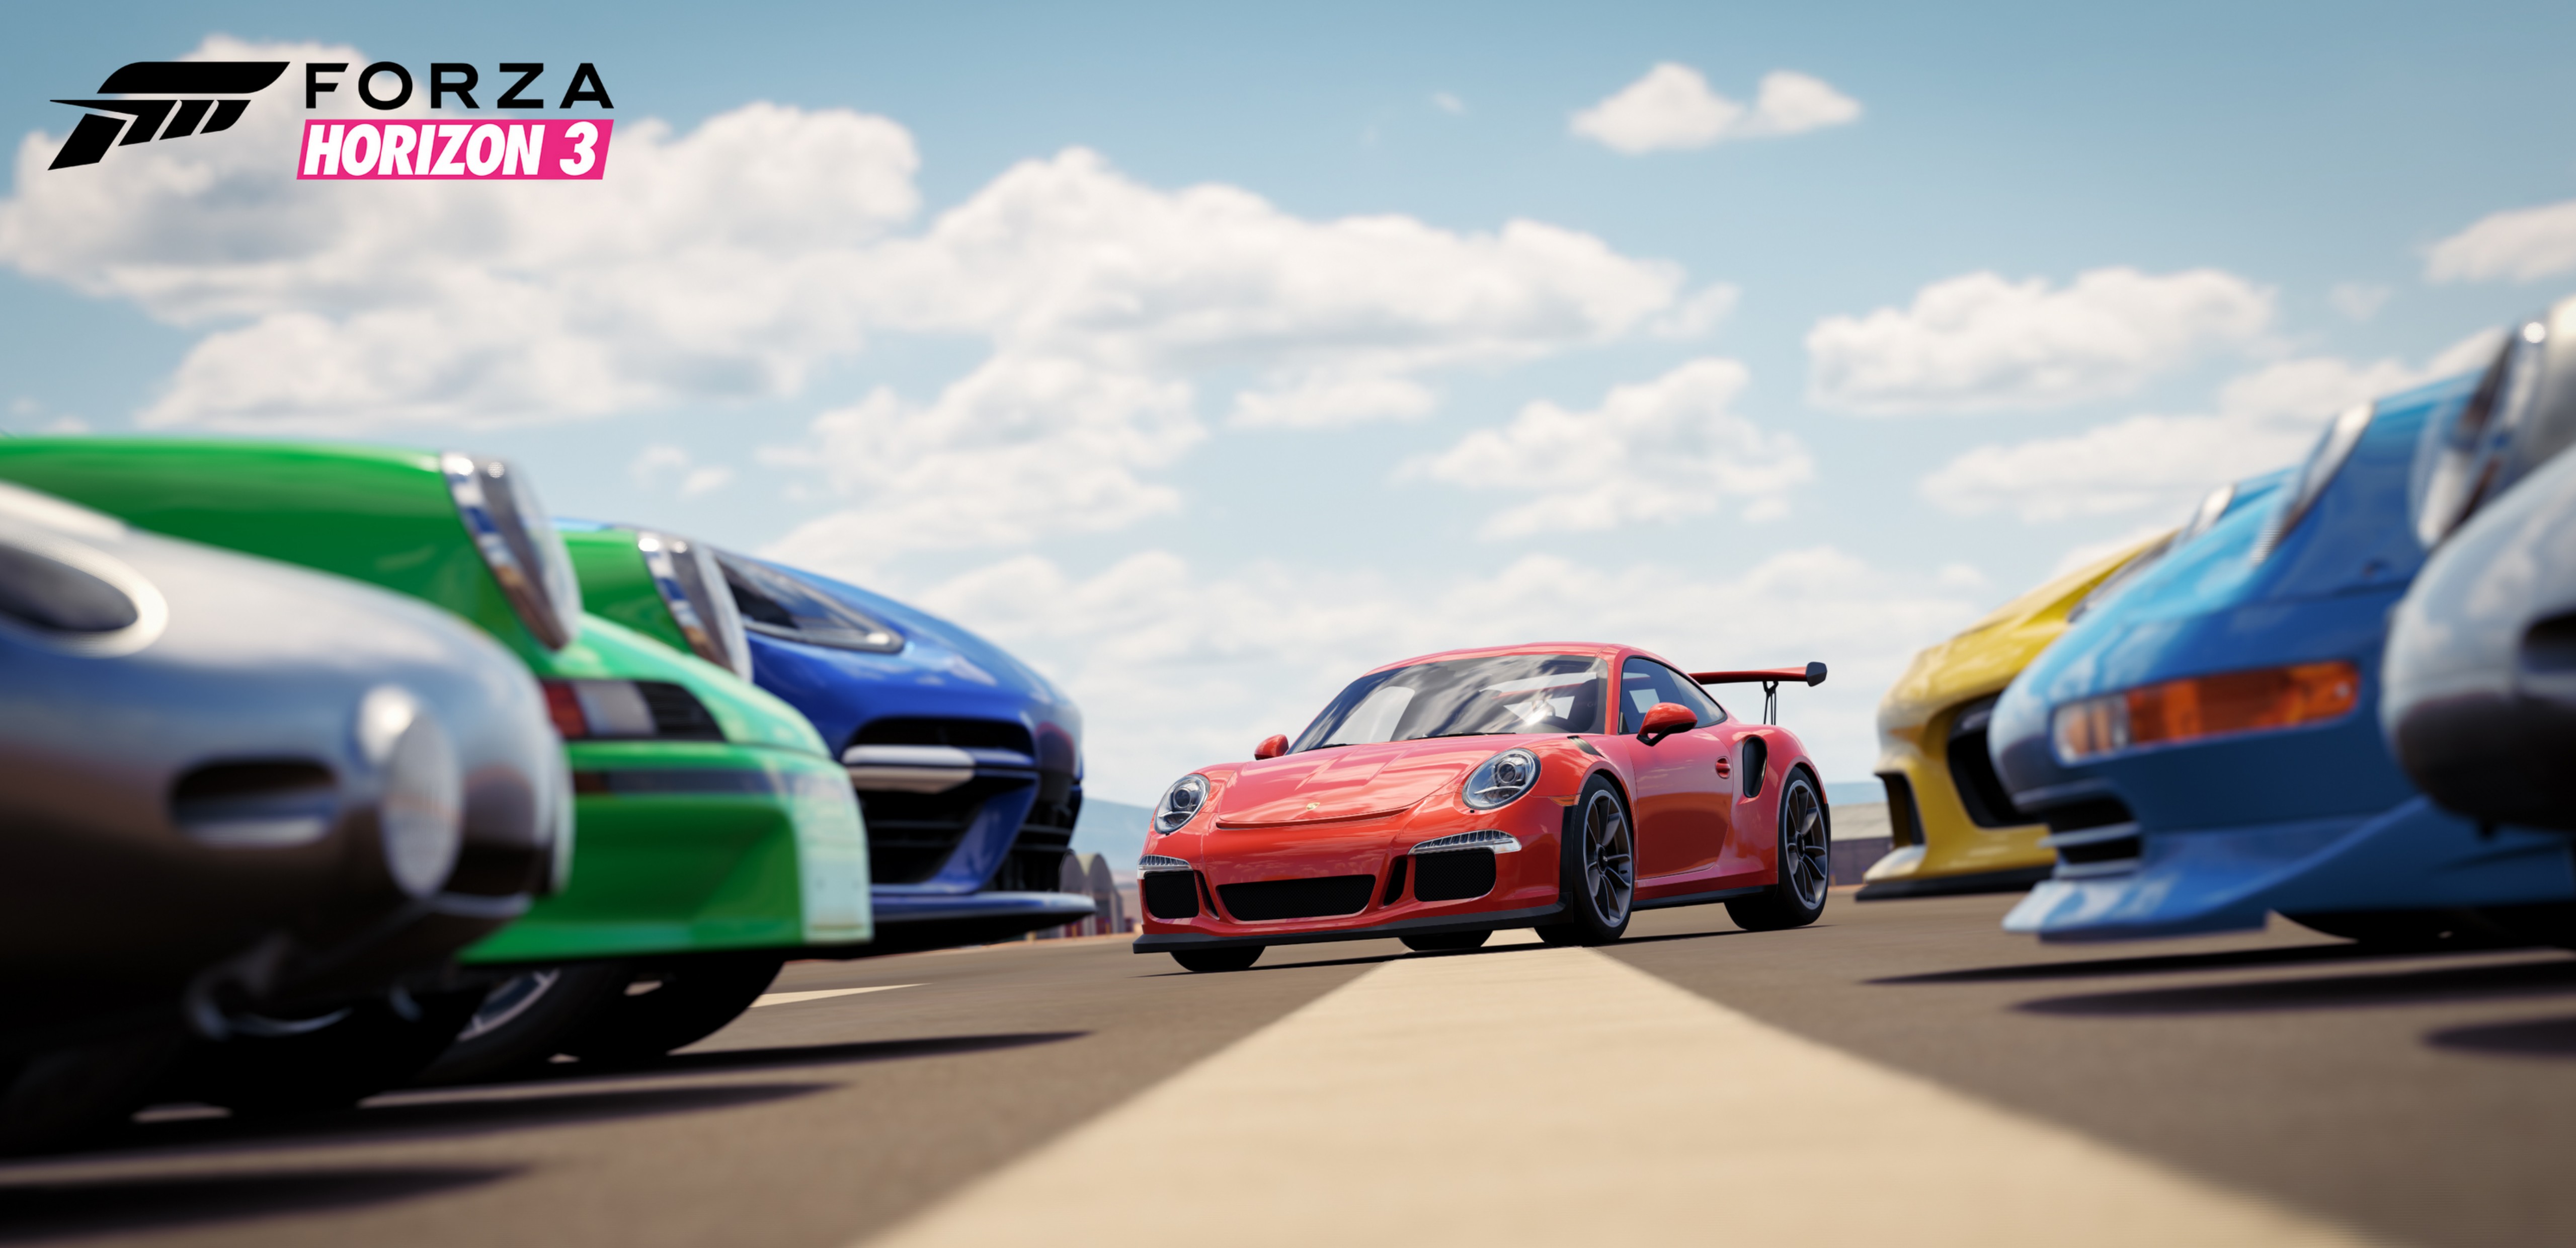 Porsche and Microsoft announce partnership for industry-leading Forza franchise